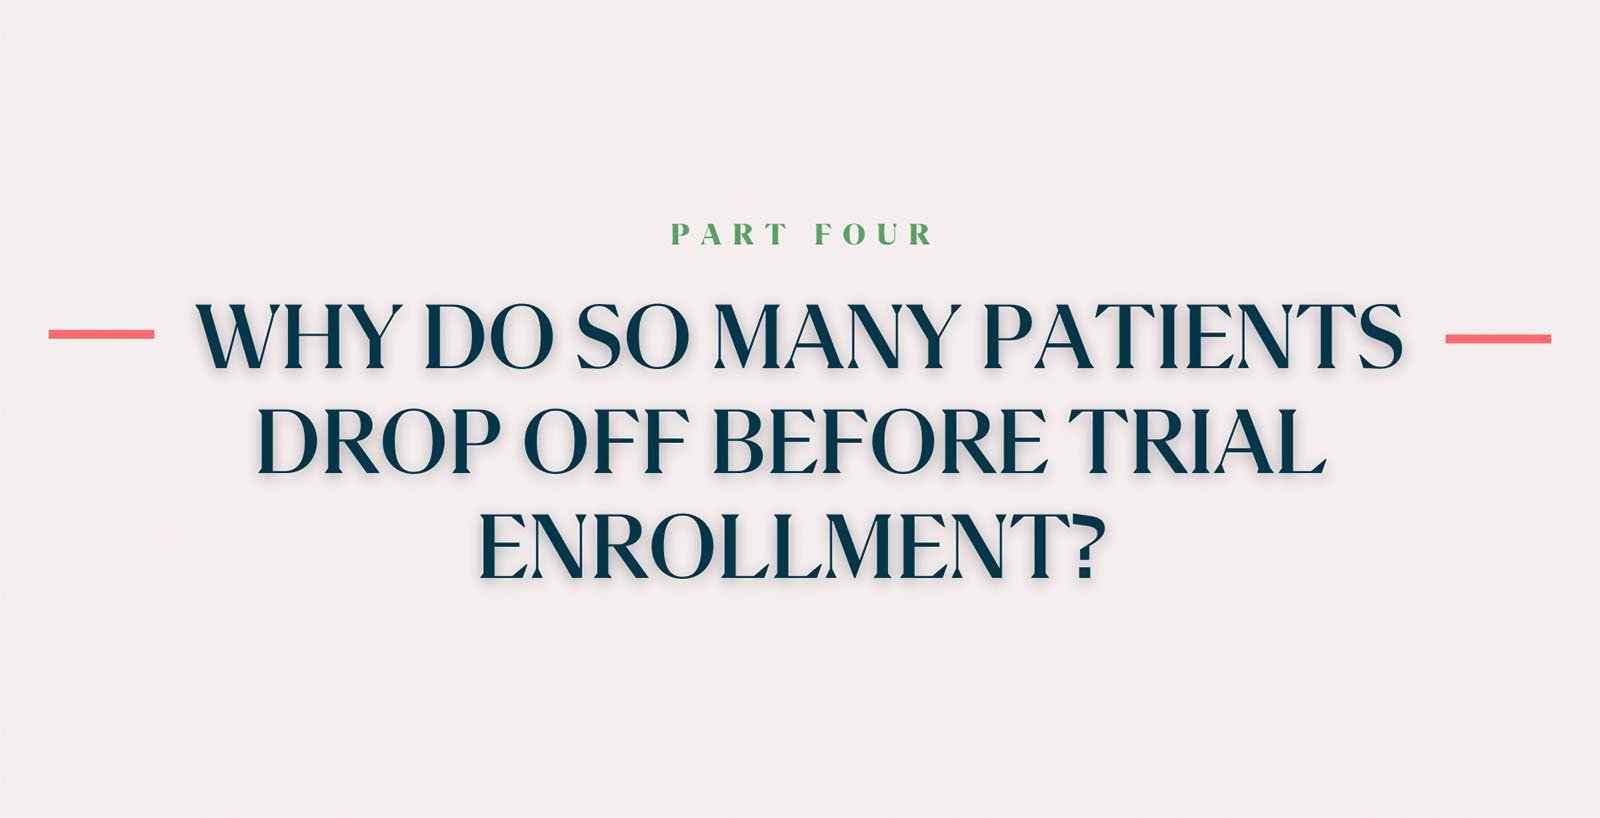 Part 4: Why Do So Many Patients Drop Off Before Trial Enrollment?